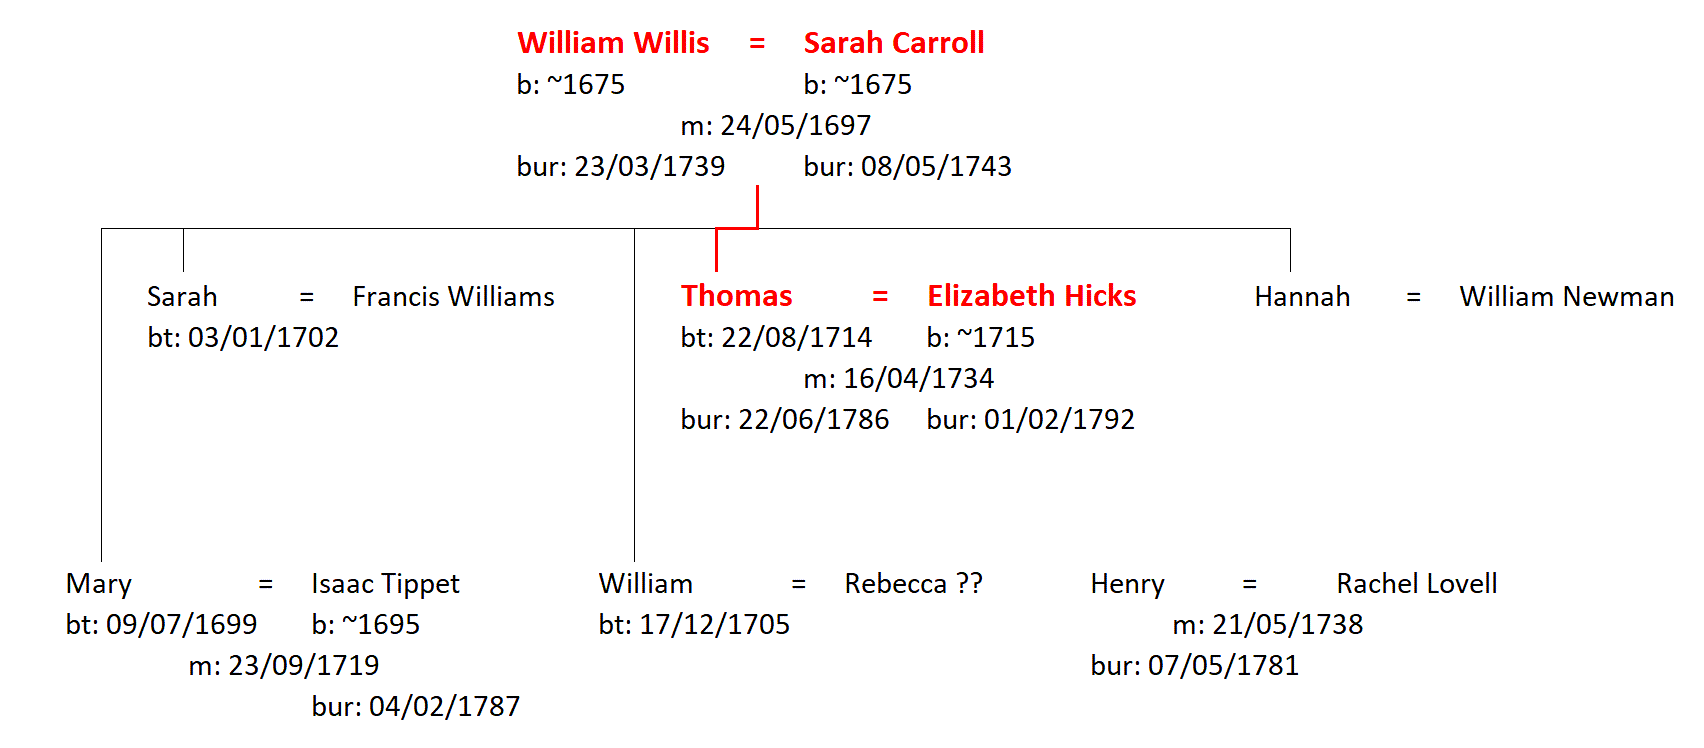 Figure 2: The Family of William and Sarah Willis